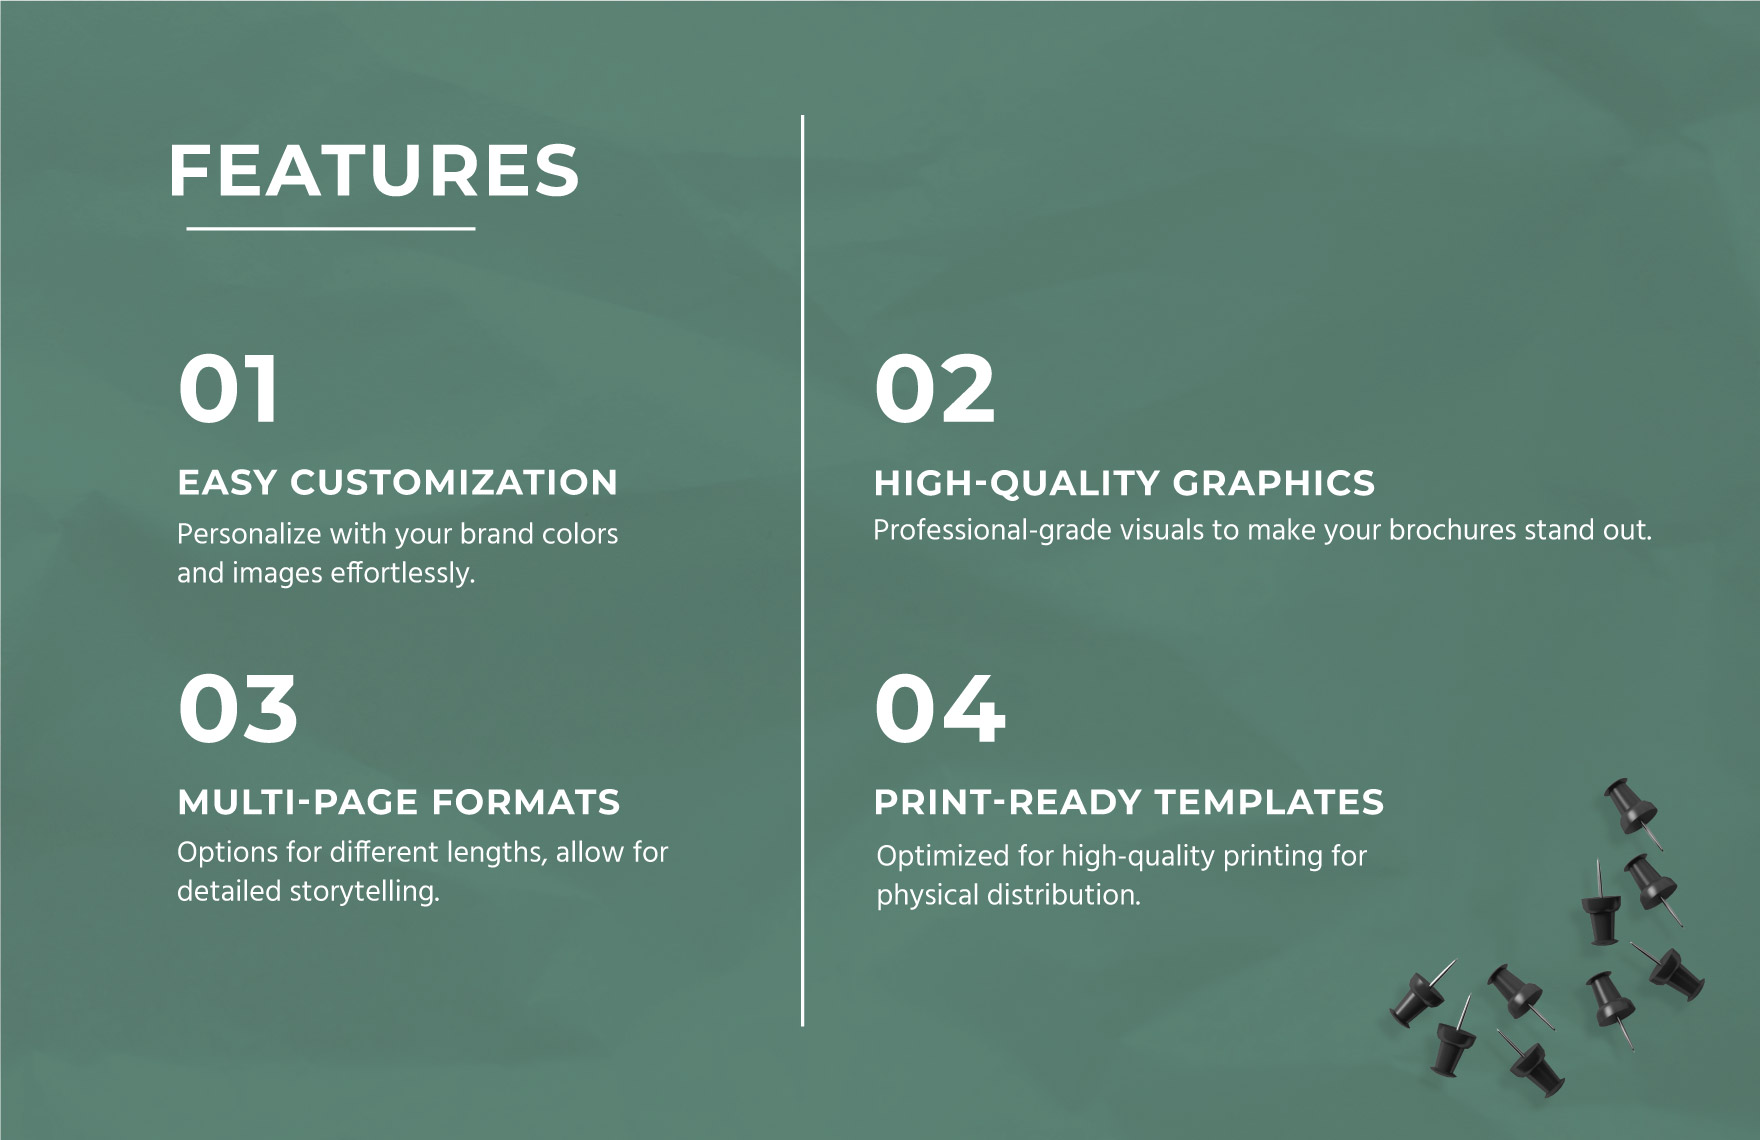 Warranty and Support Brochure Template